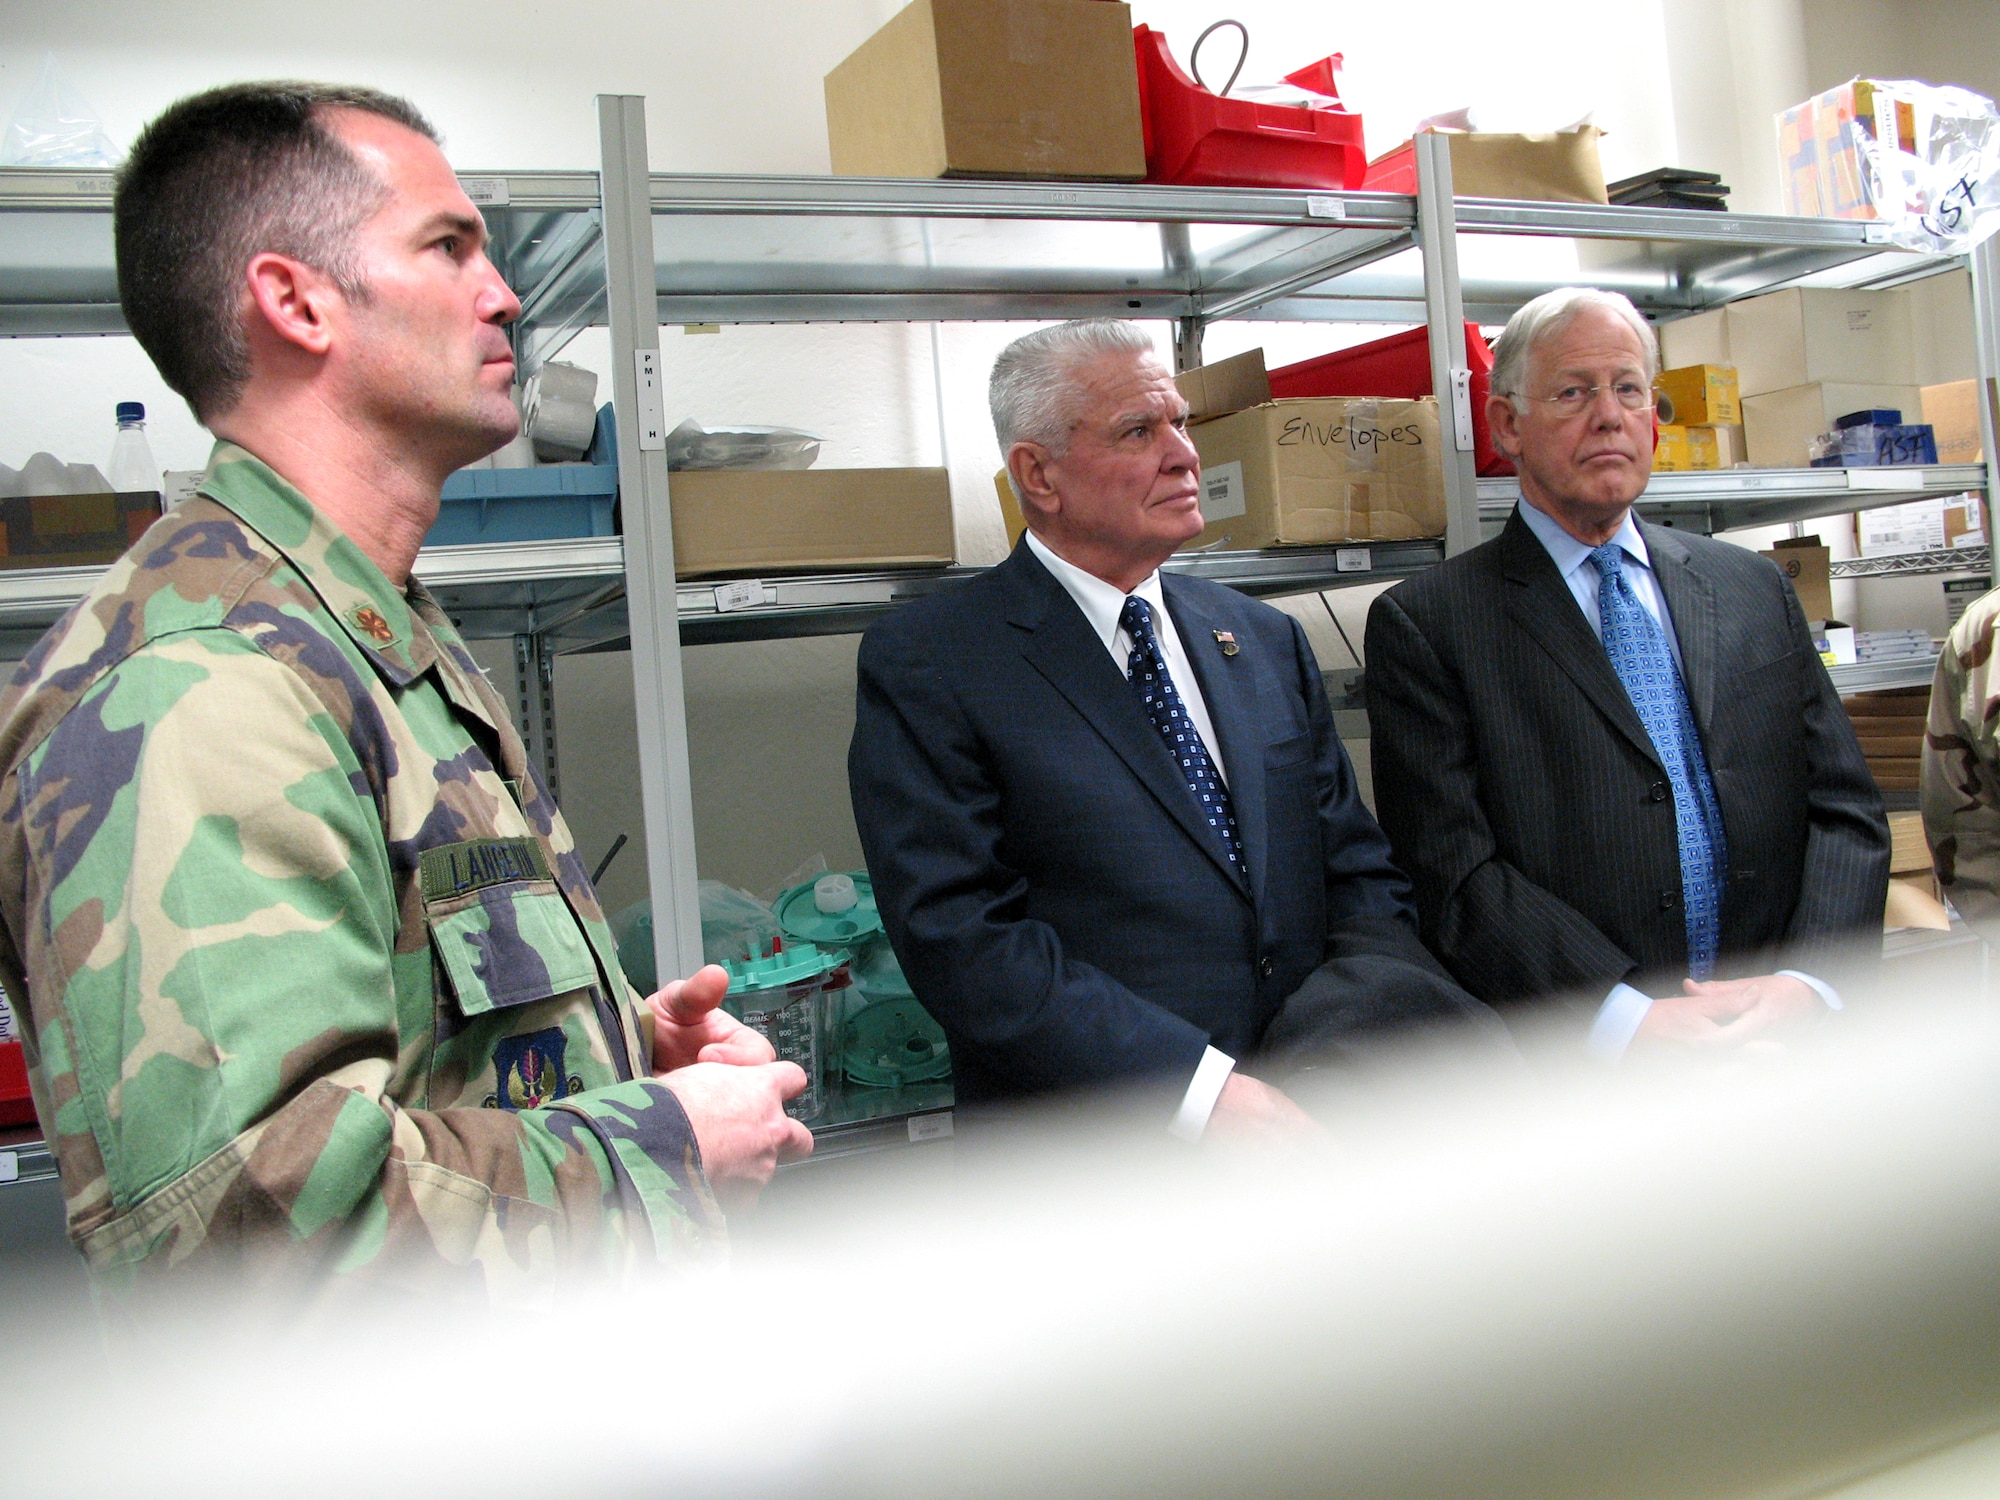 Dr. William Plested (center) and Dr. J. Edward Hill (right) get a tour of the Contingency Aeromedical Staging Facility Feb. 22 at Ramstein Air Base, Germany. They were joined by Maj. Paul Langevin, the CASF commander. Dr. Plested is the president of the American Medical Association, and Dr. Hill is the former AMA president. (U.S. Air Force photo/Staff Sgt. Laura Holzer) 